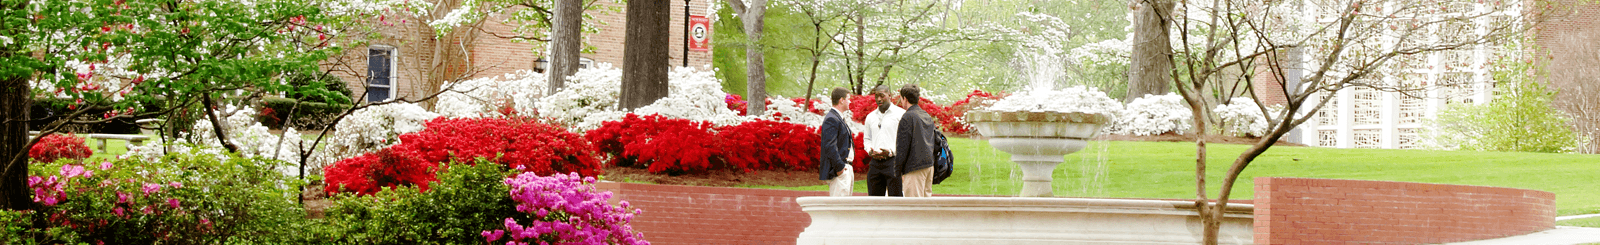 3 males talking on campus by fountain